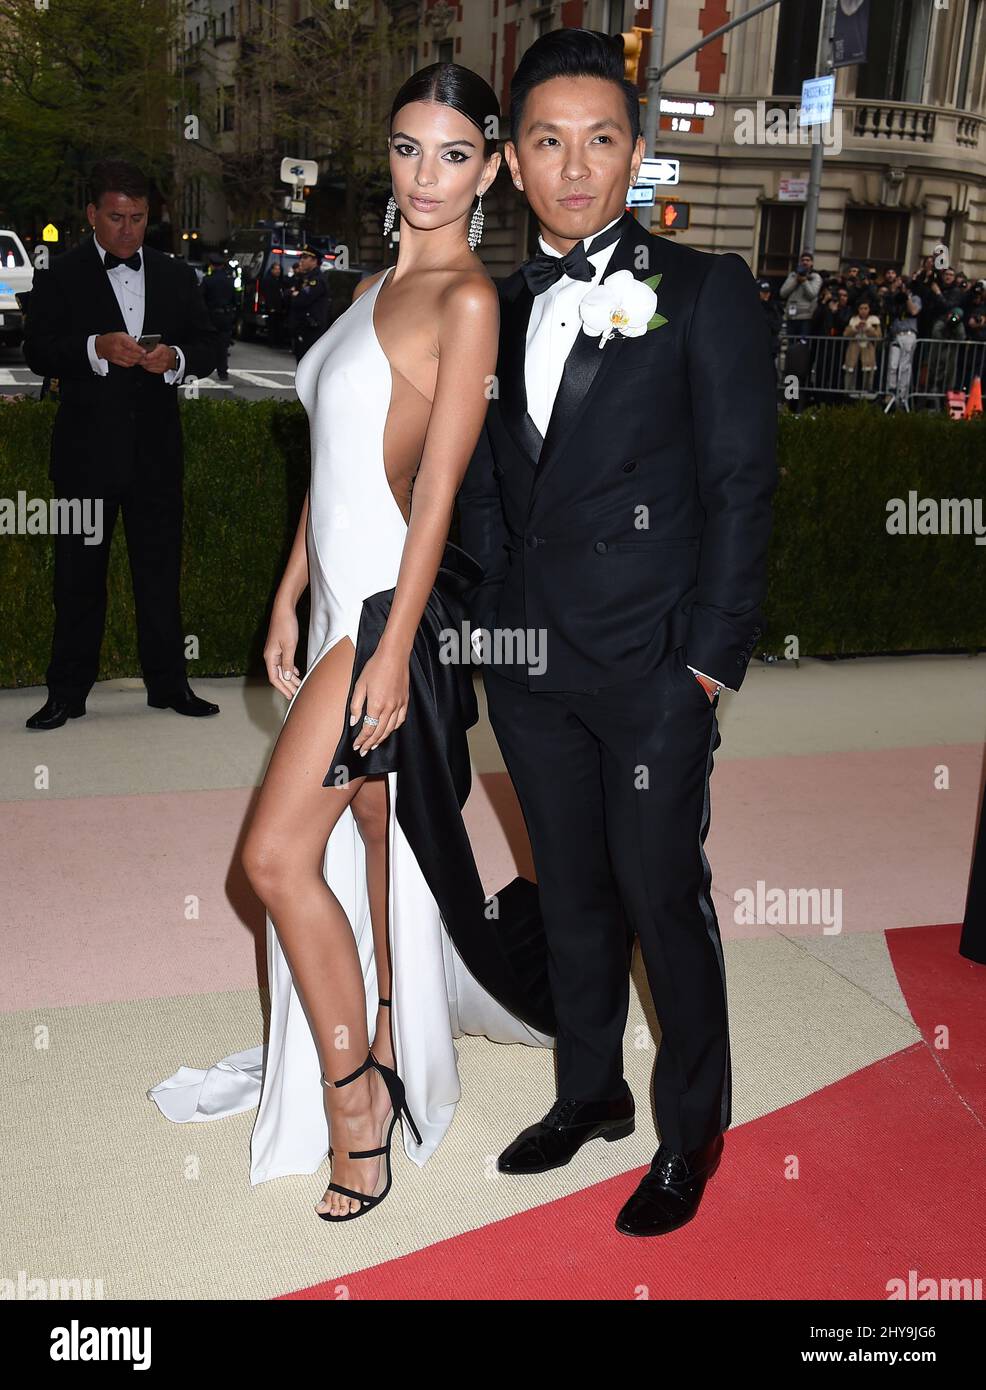 Emily Ratajkowski and Prabal Gurung attending the MET Gala 2016 costume Institute Benefit at The Met Celebrates opening of 'Manus x Machina: Fashion in an Age of Technology' Exhibition held at the Metropolitan Museum of Art in New York, USA. Stock Photo